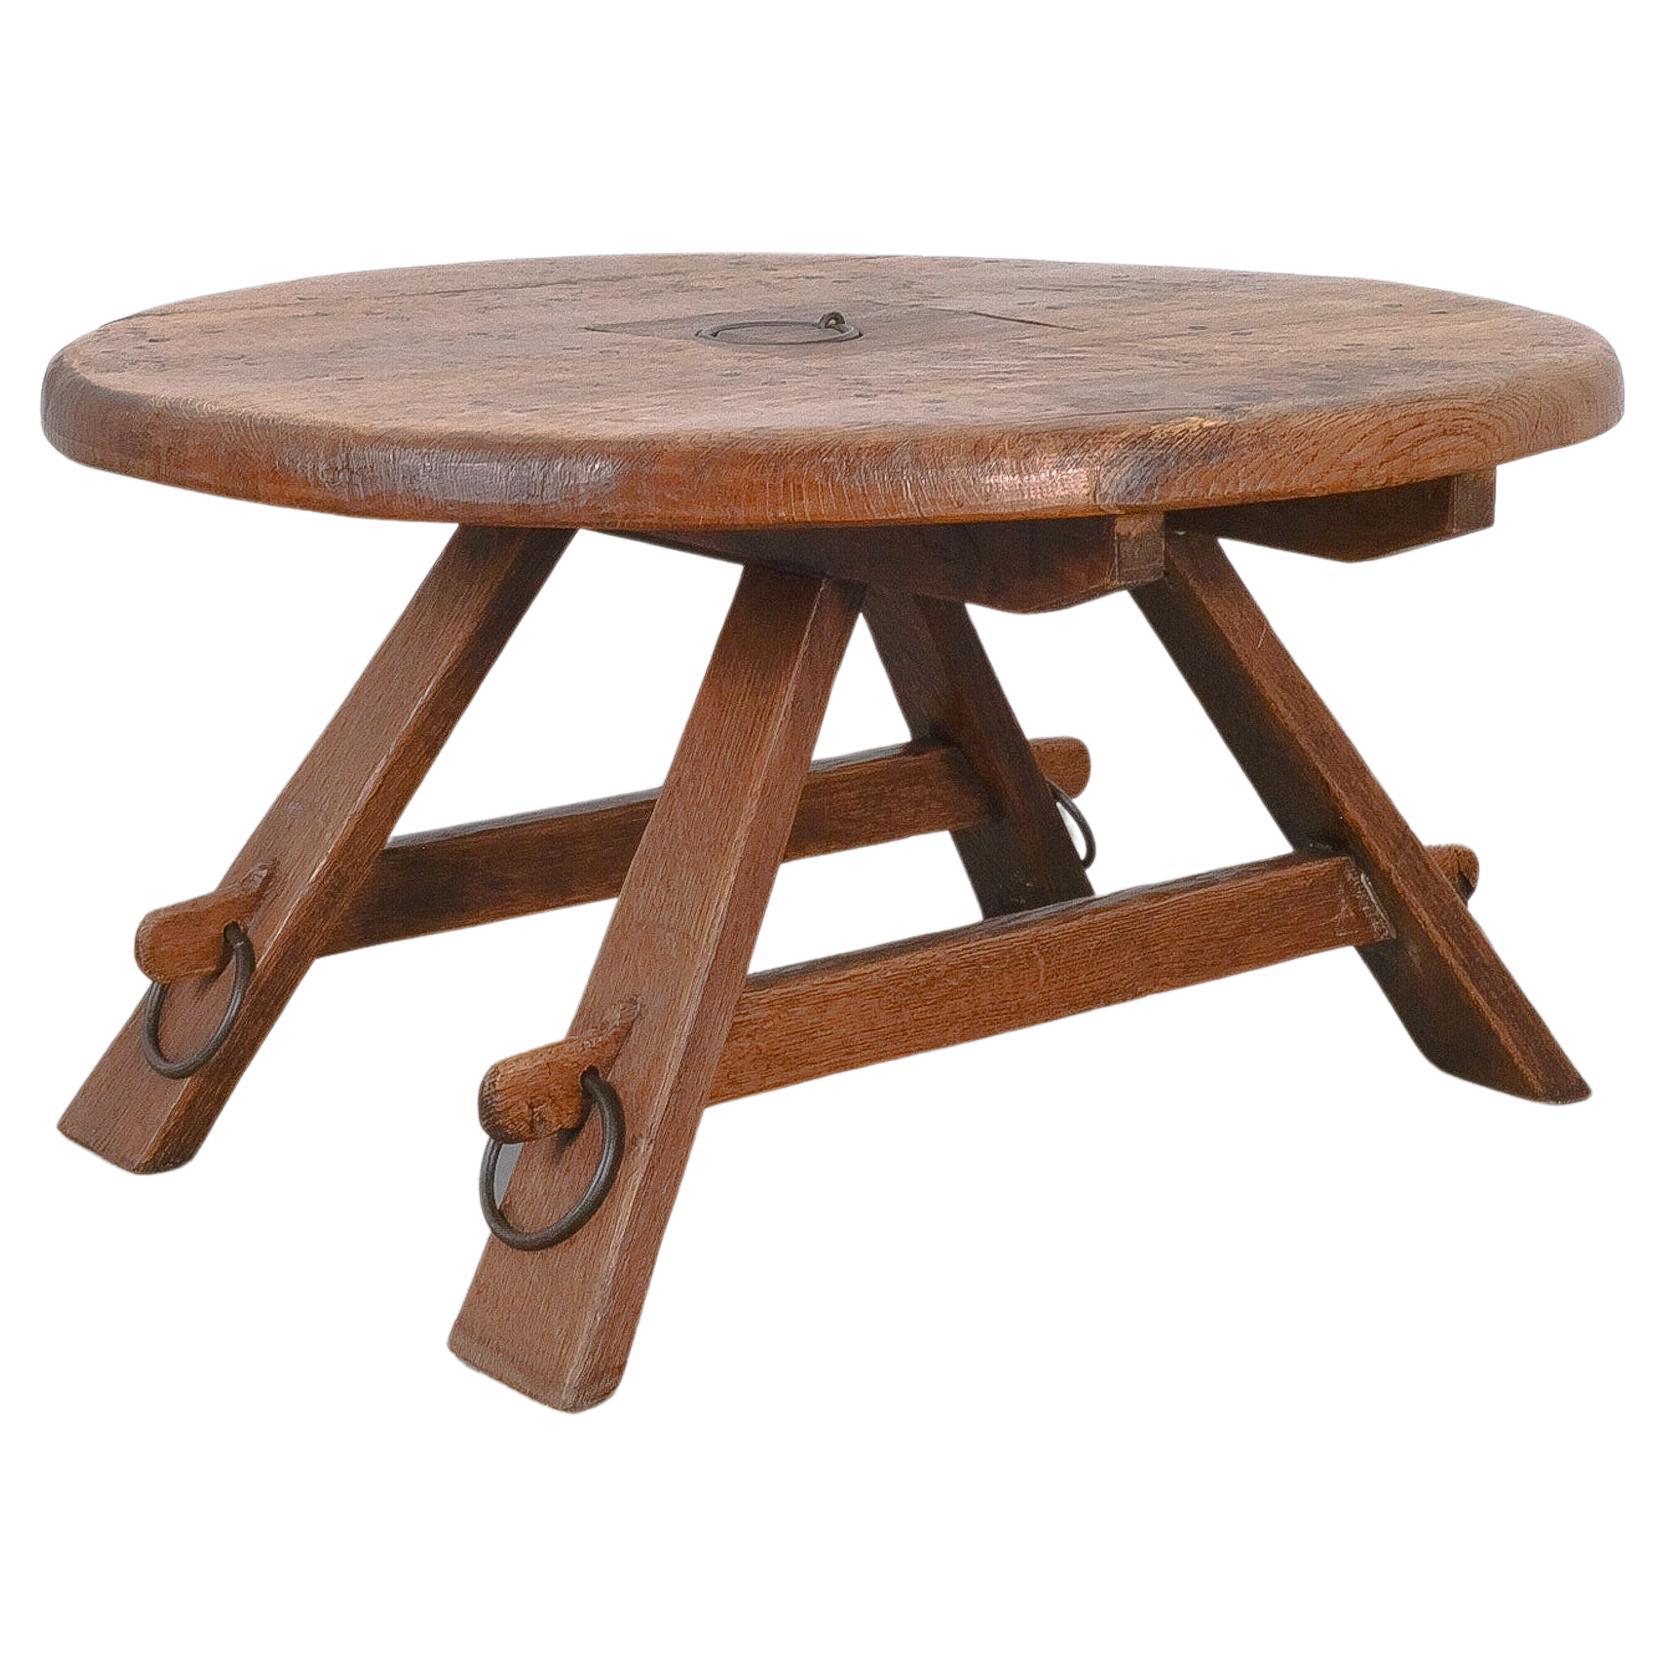 Brutalist Oak Coffee Table Carved Wood Artisan with Iron Details, France, 1950 For Sale